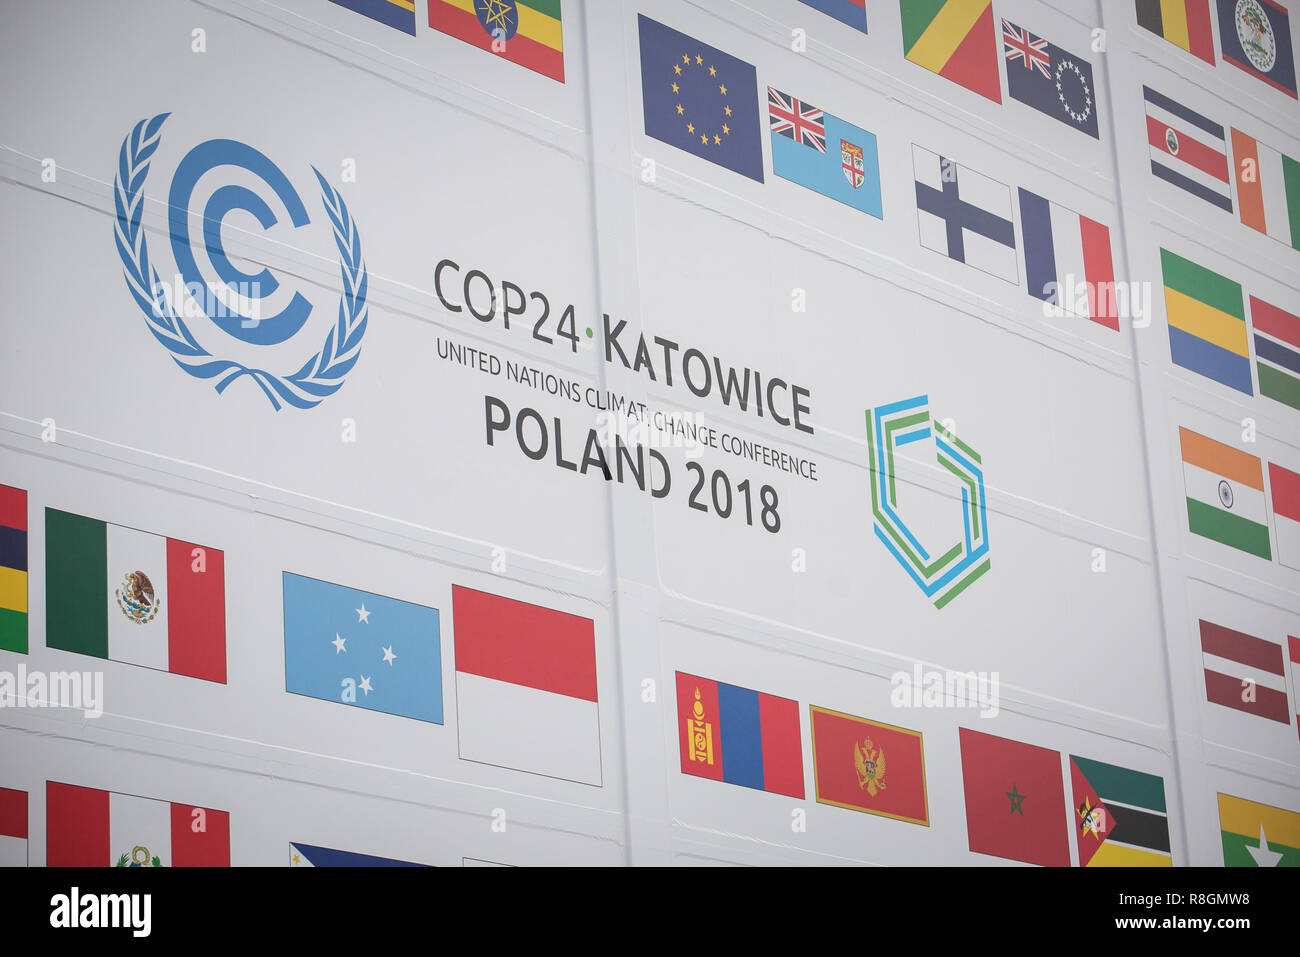 International Congress Centre during the UN Climate Change Conference (COP24) in Katowice, Poland on 3 December 2018 Stock Photo